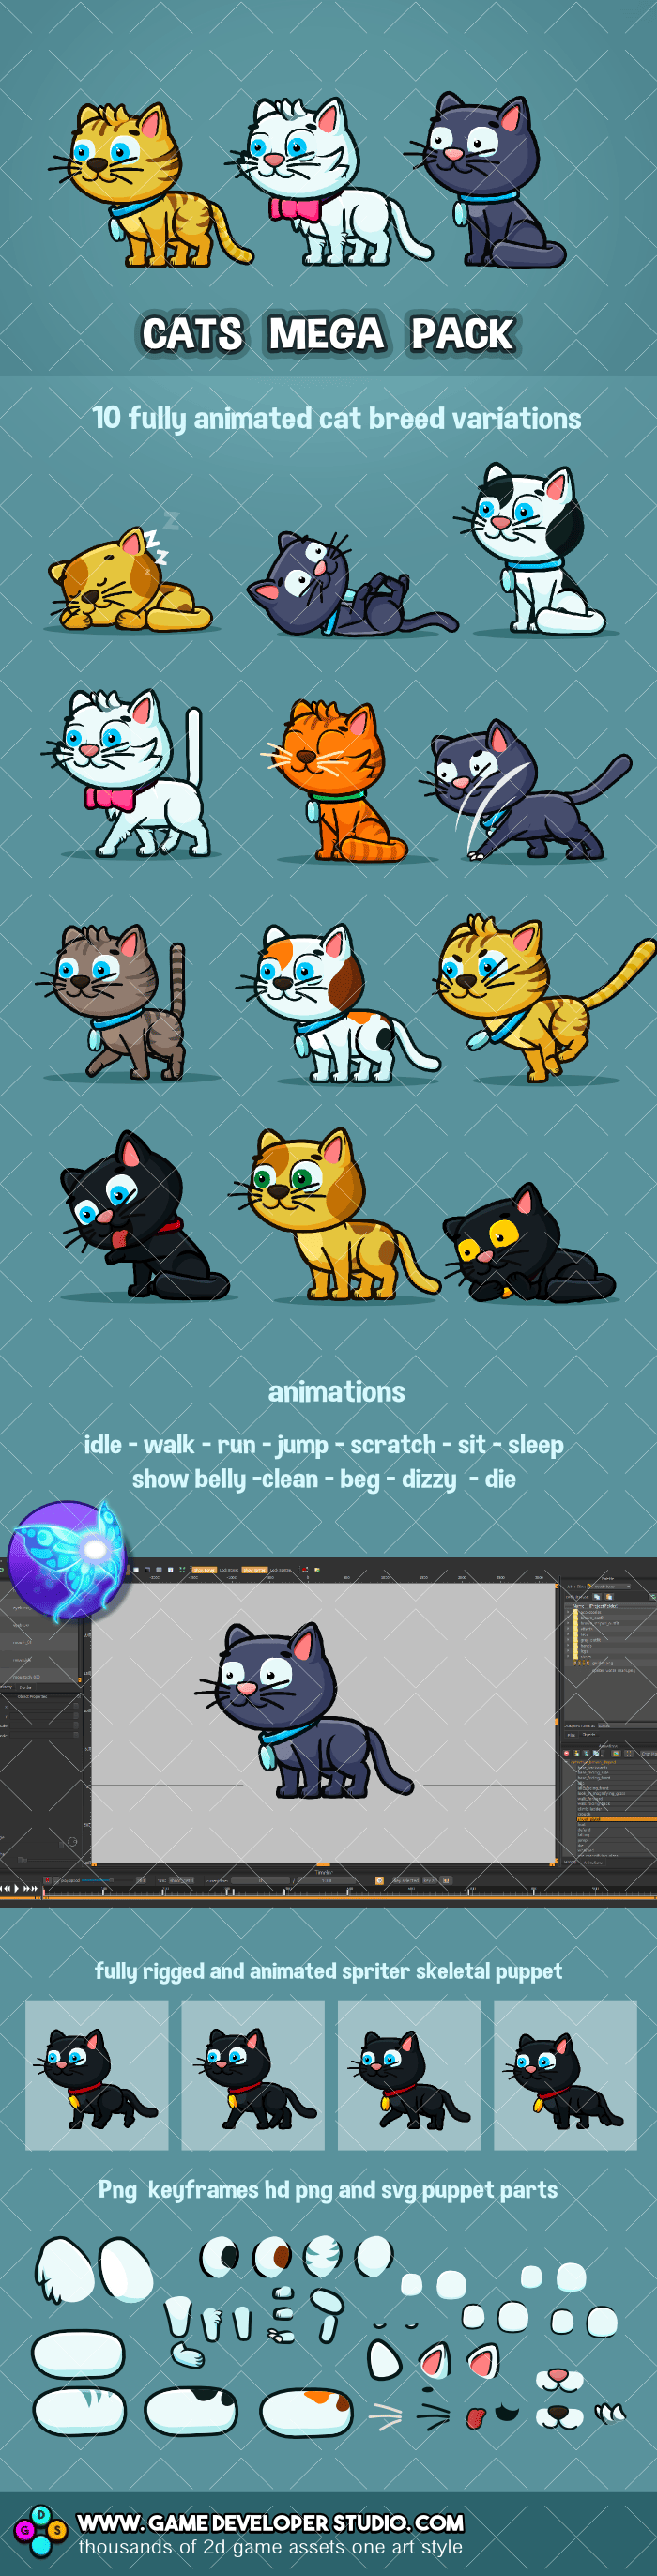 animated cat game character pack